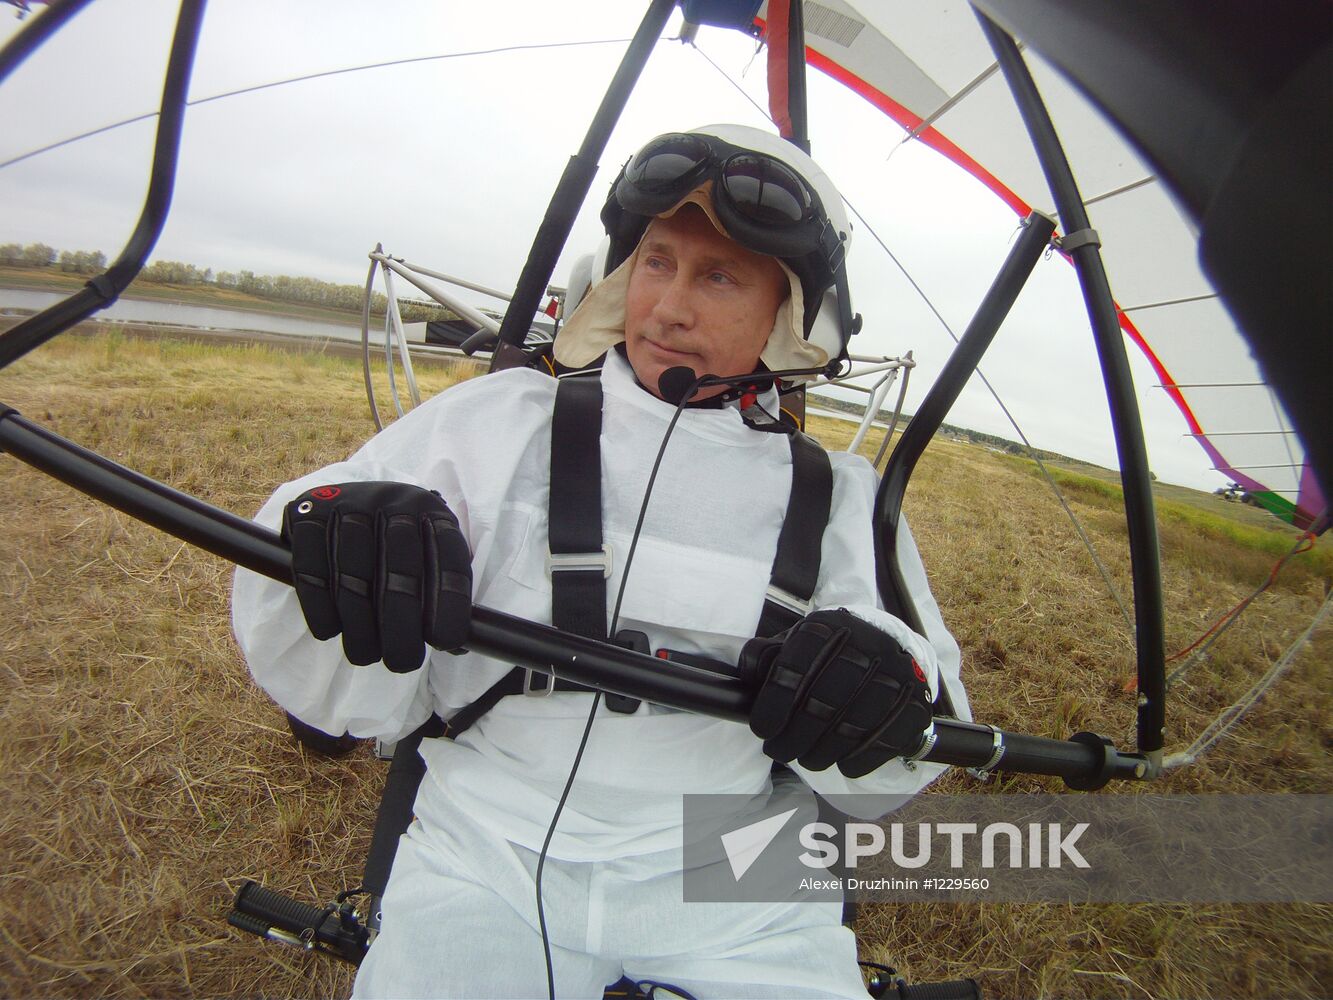 V. Putin takes part in an environmental project "Flight of Hope"